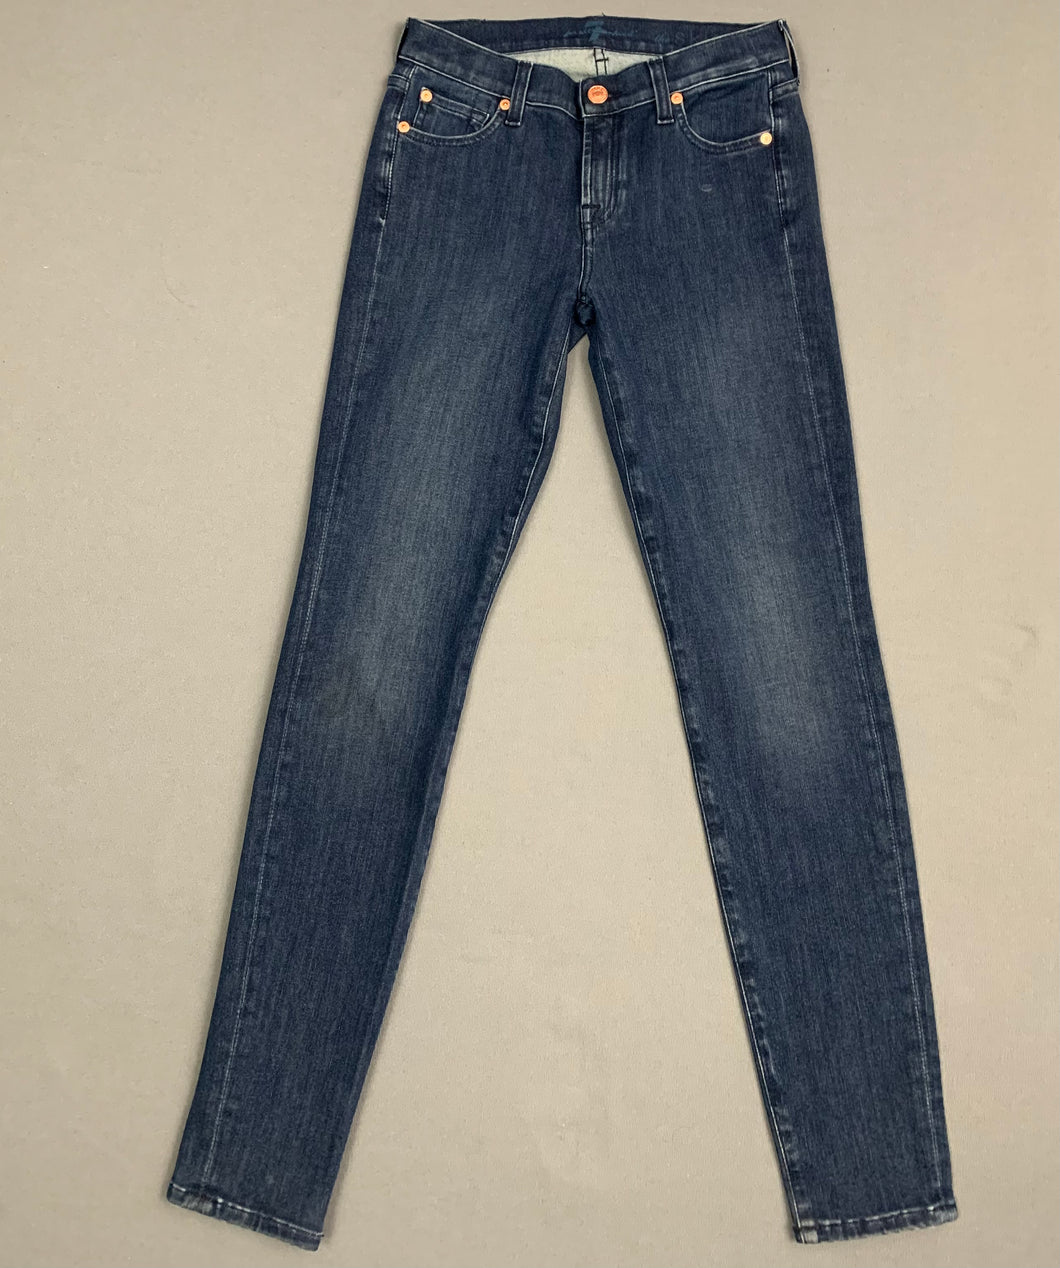 7 FOR ALL MANKIND THE SKINNY JEANS - Blue Denim - Size Waist 24